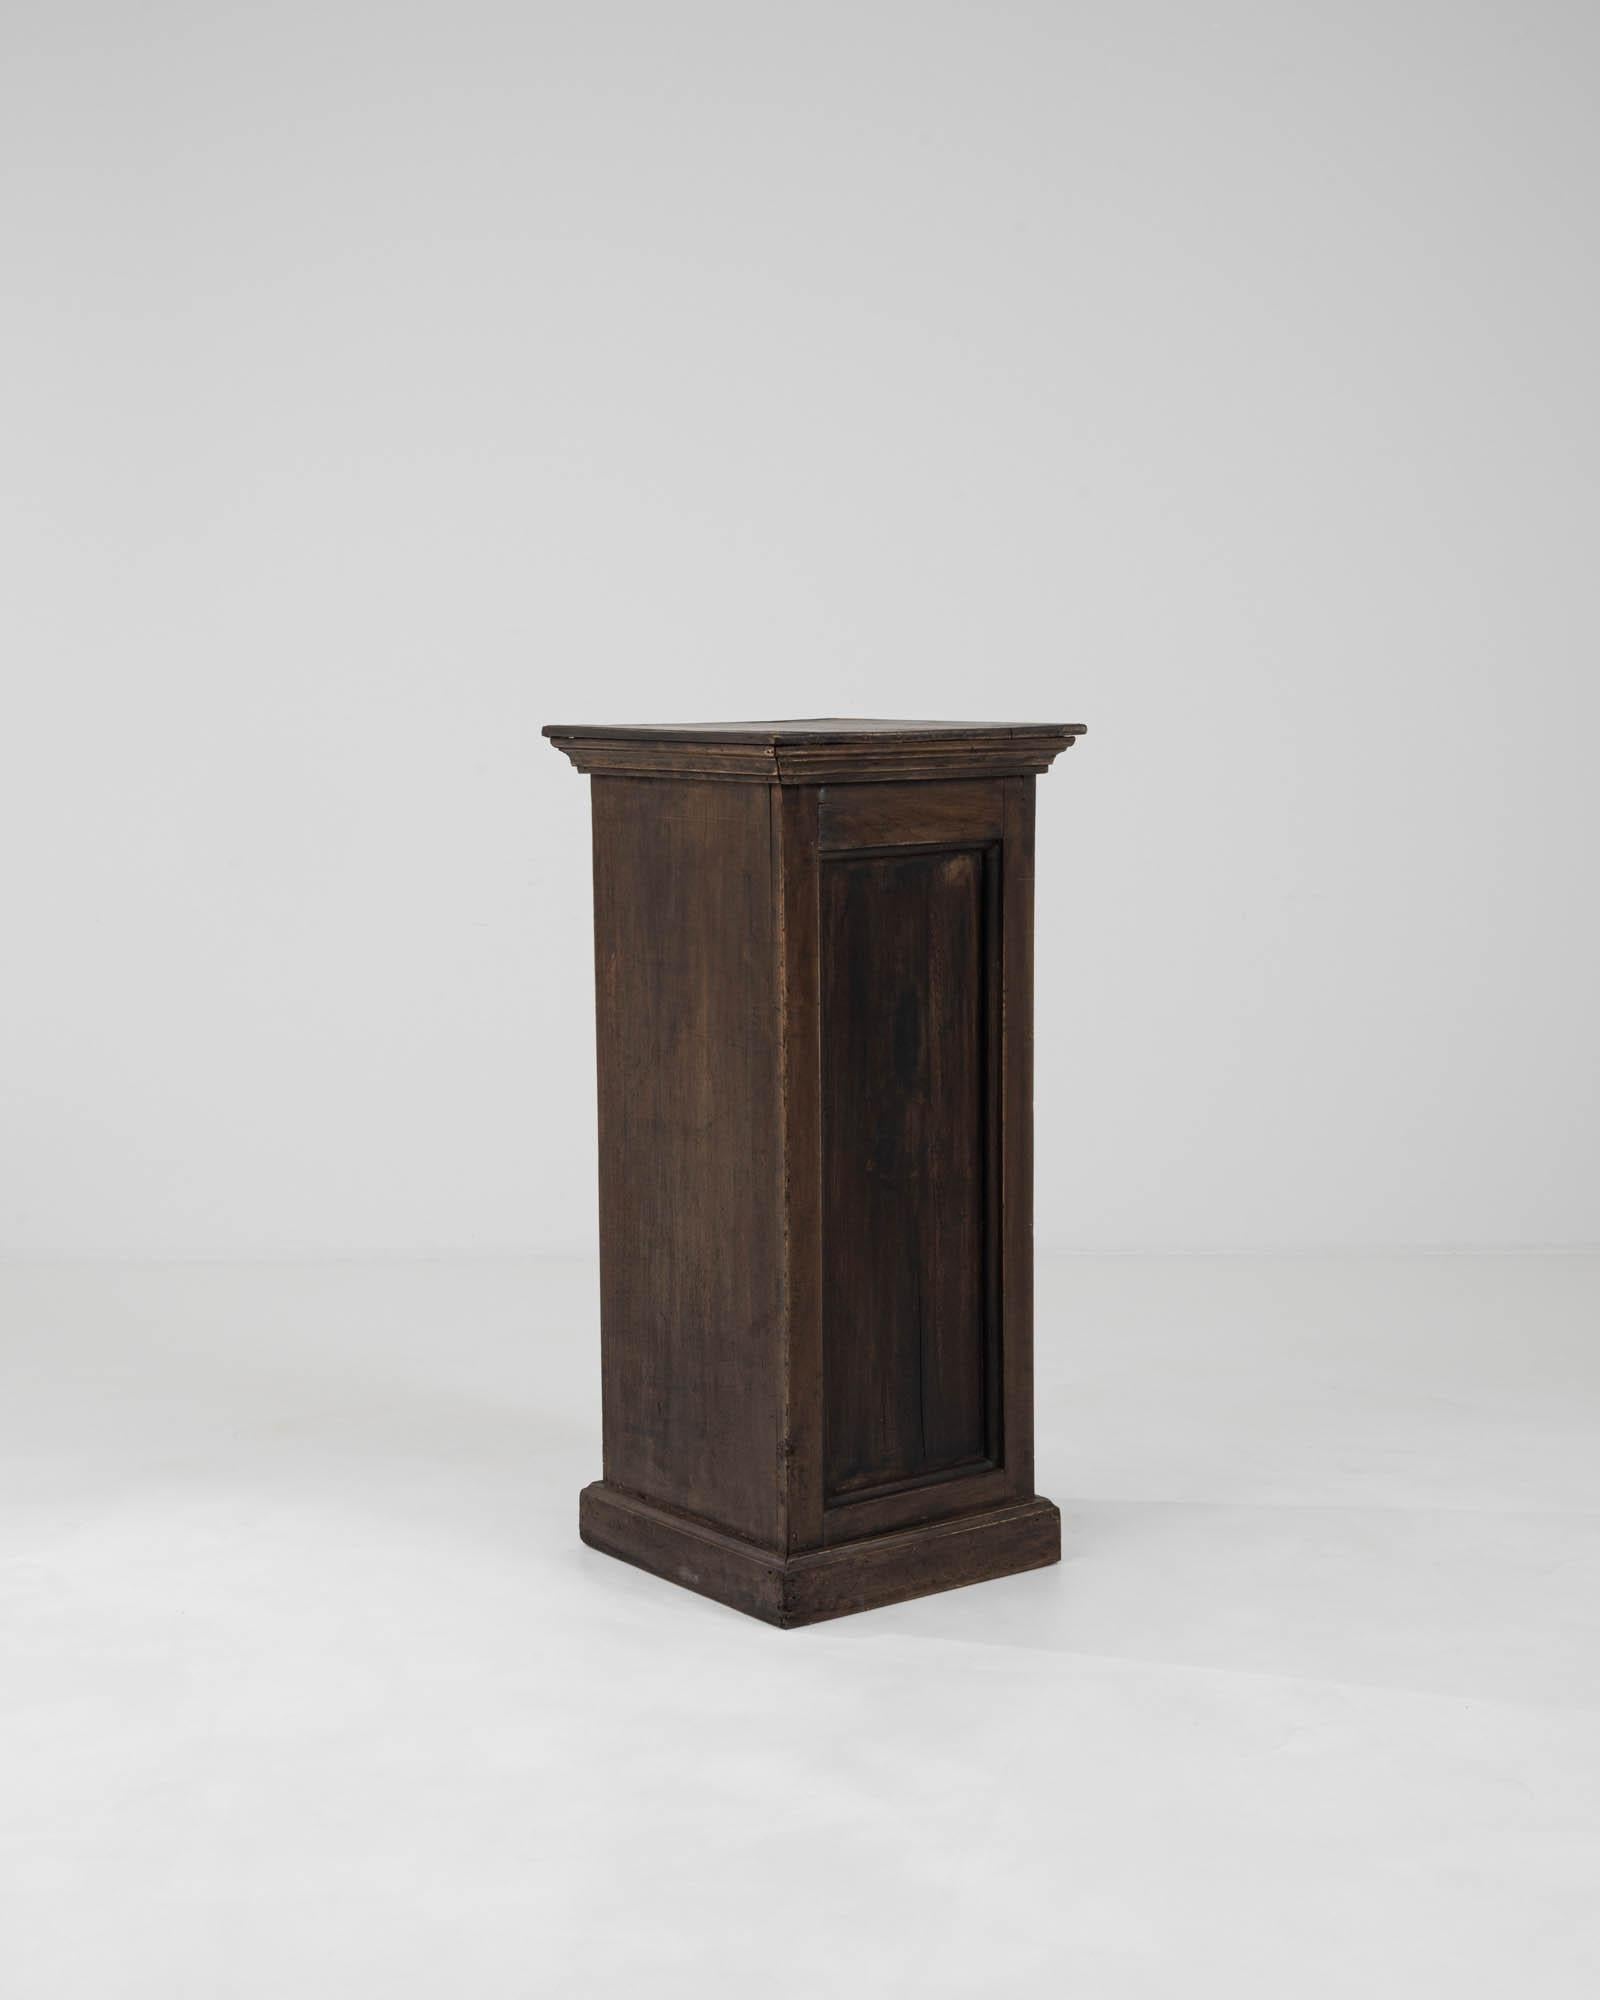 This 19th Century French Wooden Pedestal stands as a testament to the timeless elegance of classical design. Crafted from solid wood, its rich, dark patina and sturdy construction echo the durability and charm of a bygone era. With a slender,